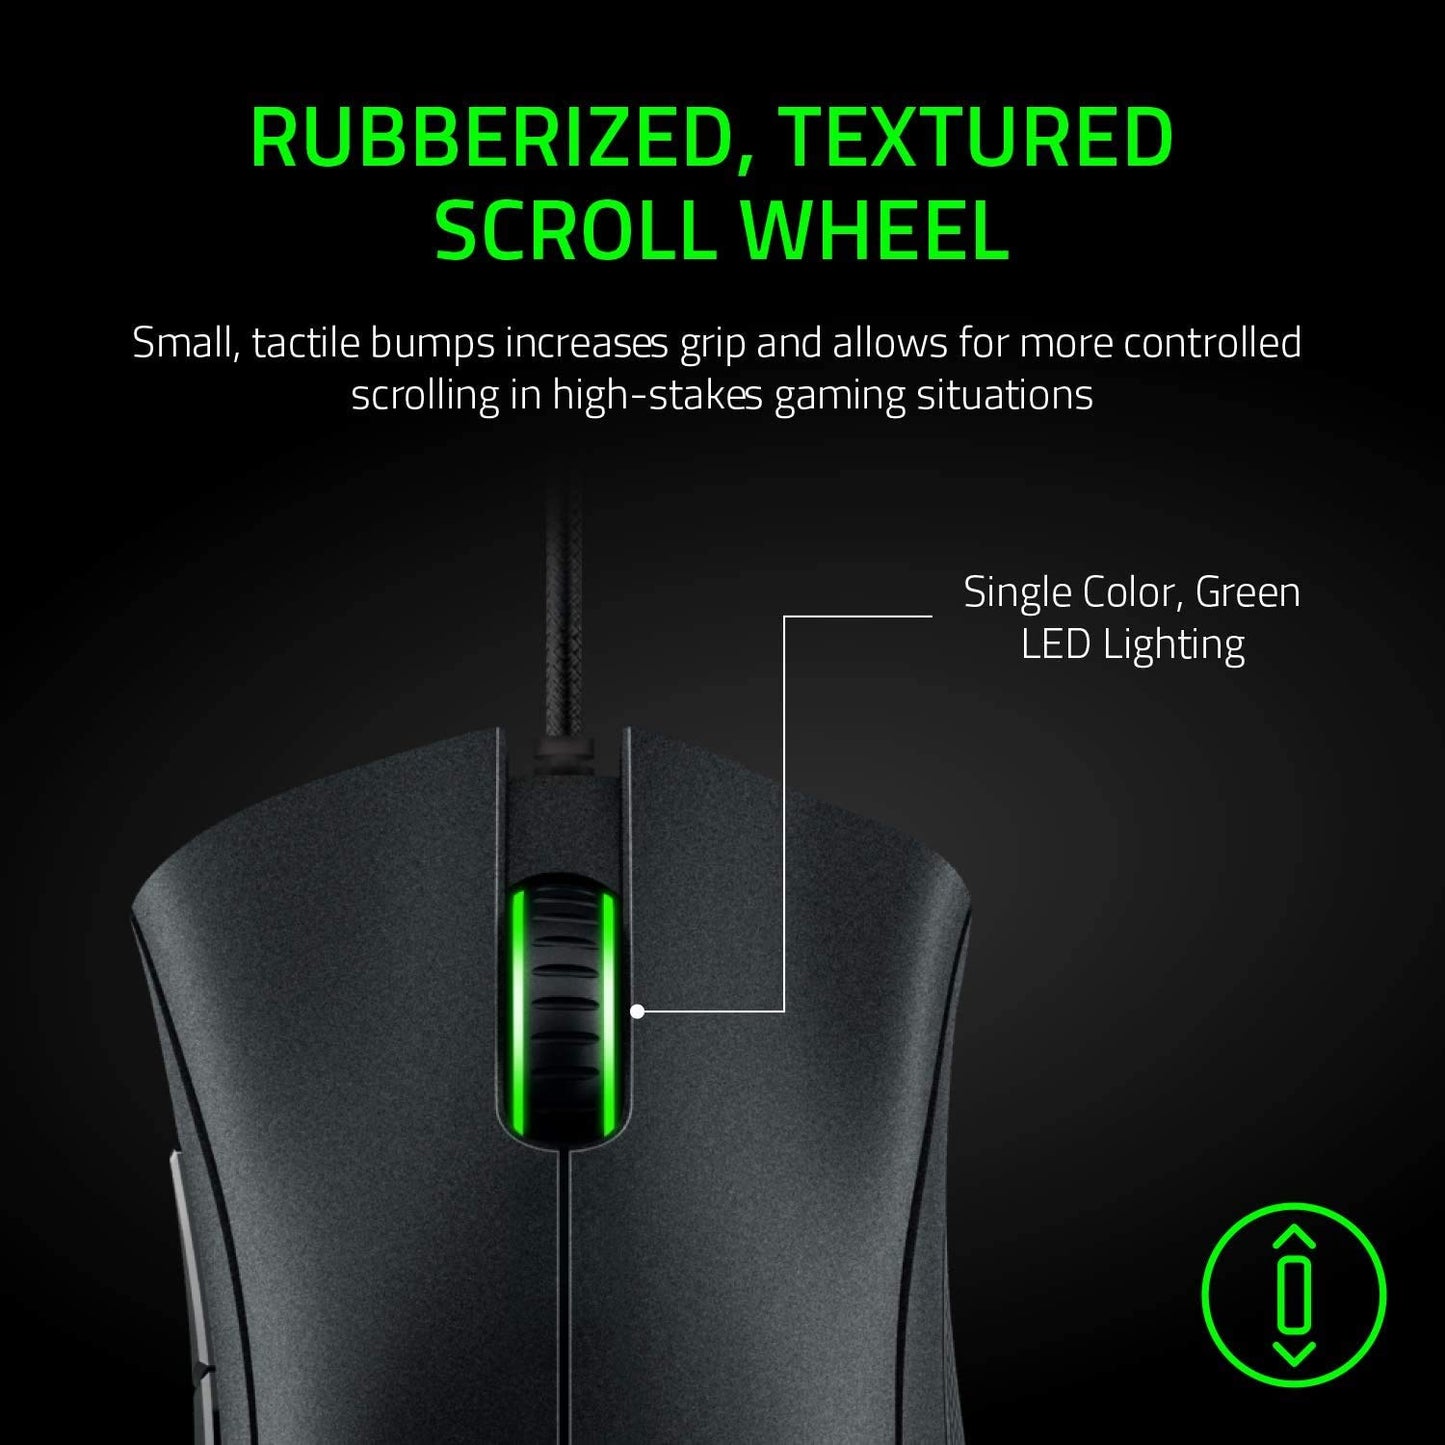 Razer DeathAdder Essential Gaming Mouse: 6400 DPI Optical Sensor - 5 Programmable Buttons - Mechanical Switches - Rubber Side Grips - Classic Black - amzGamess